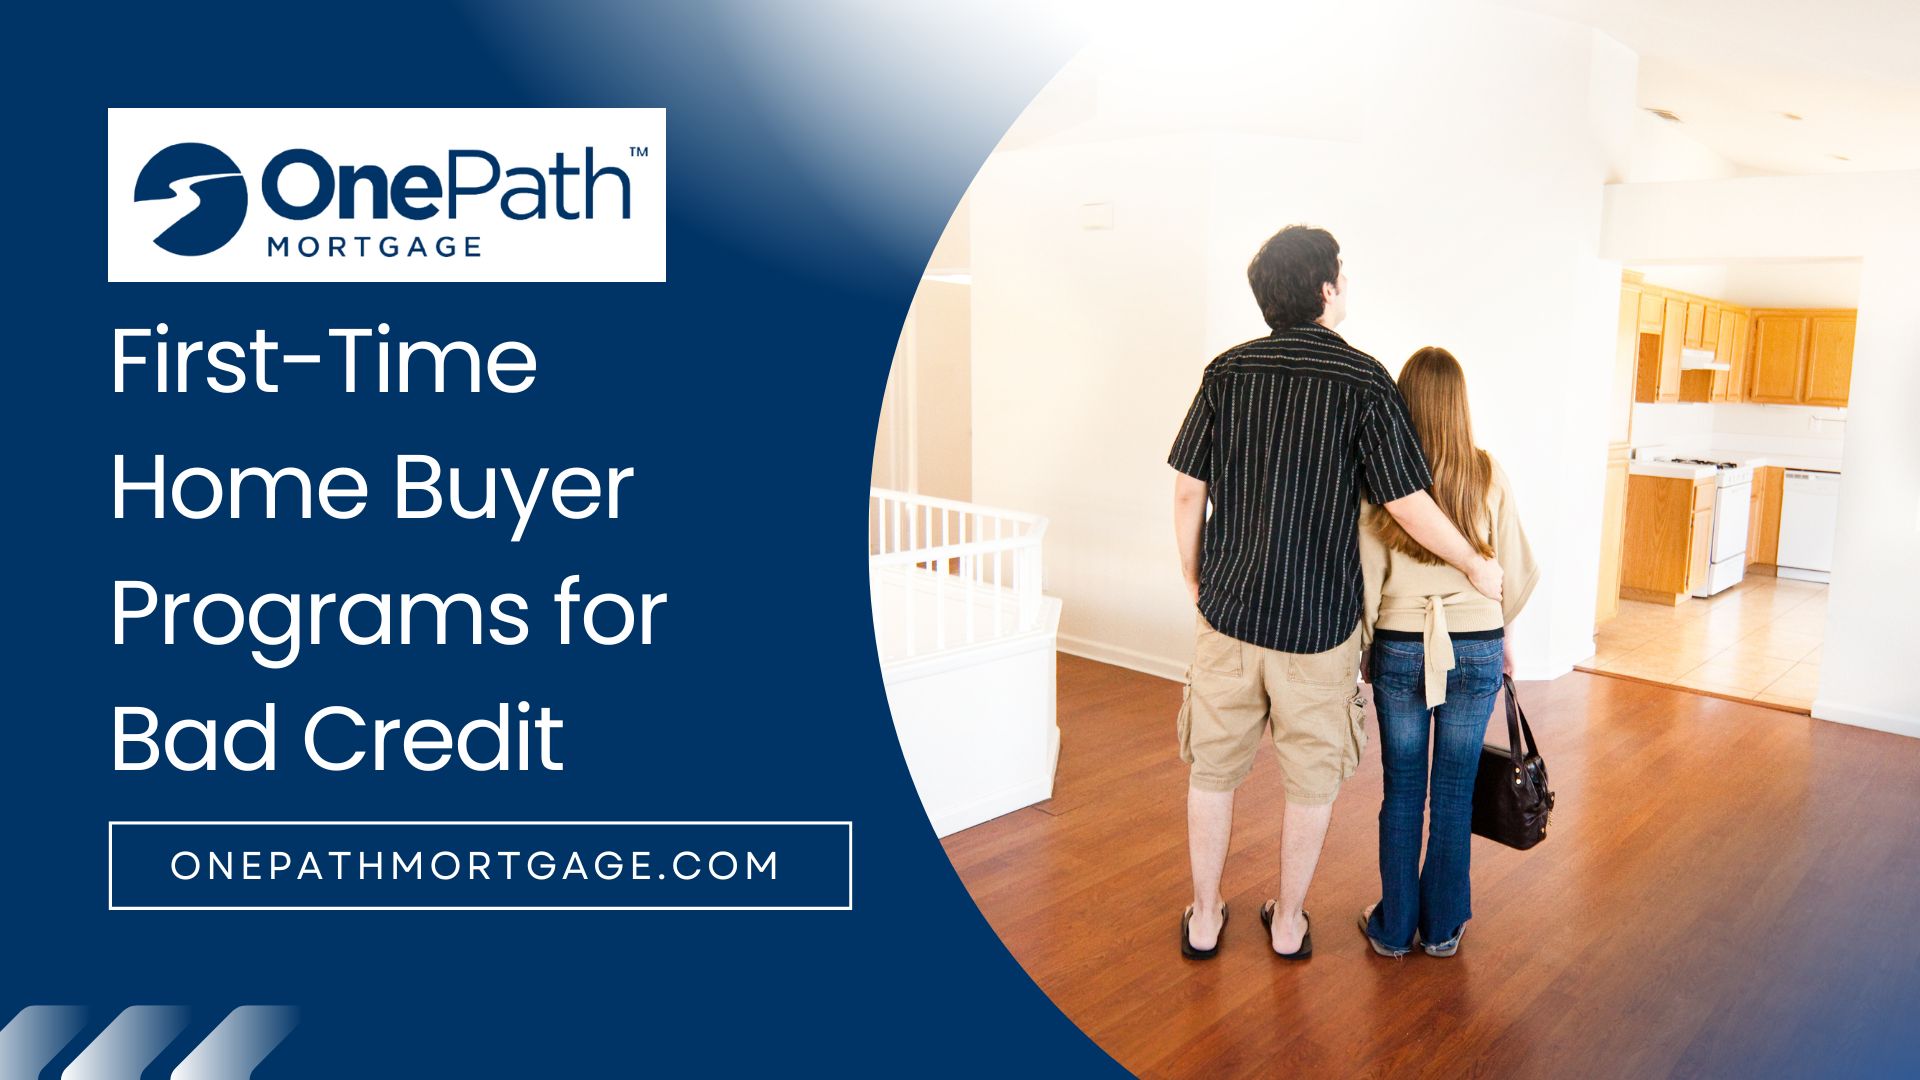 First-Time Home Buyer Programs for Bad Credit